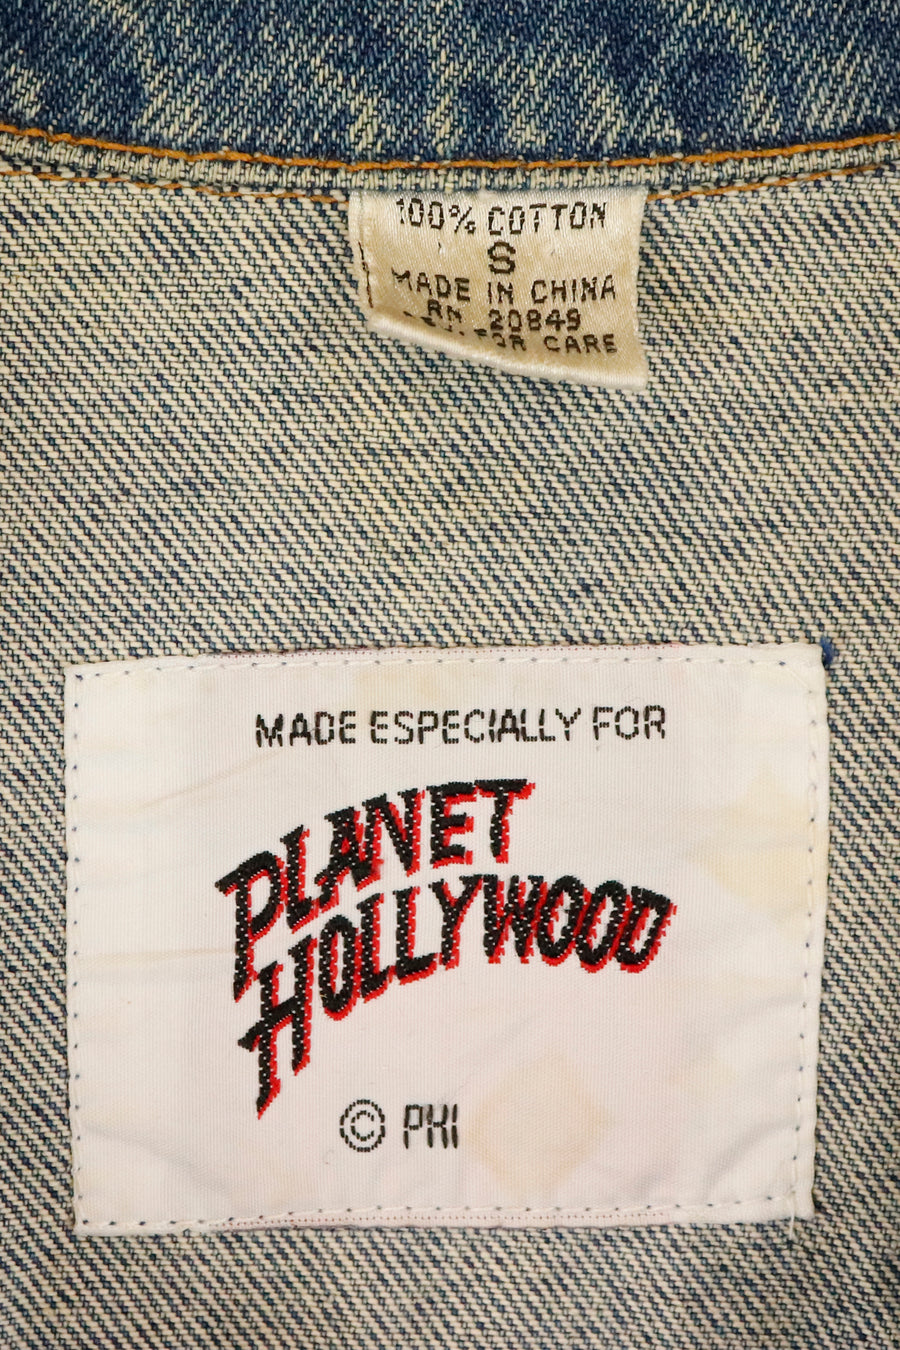 Vintage Planet Hollywood New York Embroidered Denim Jacket With Metal Pin Outerwear Sz S